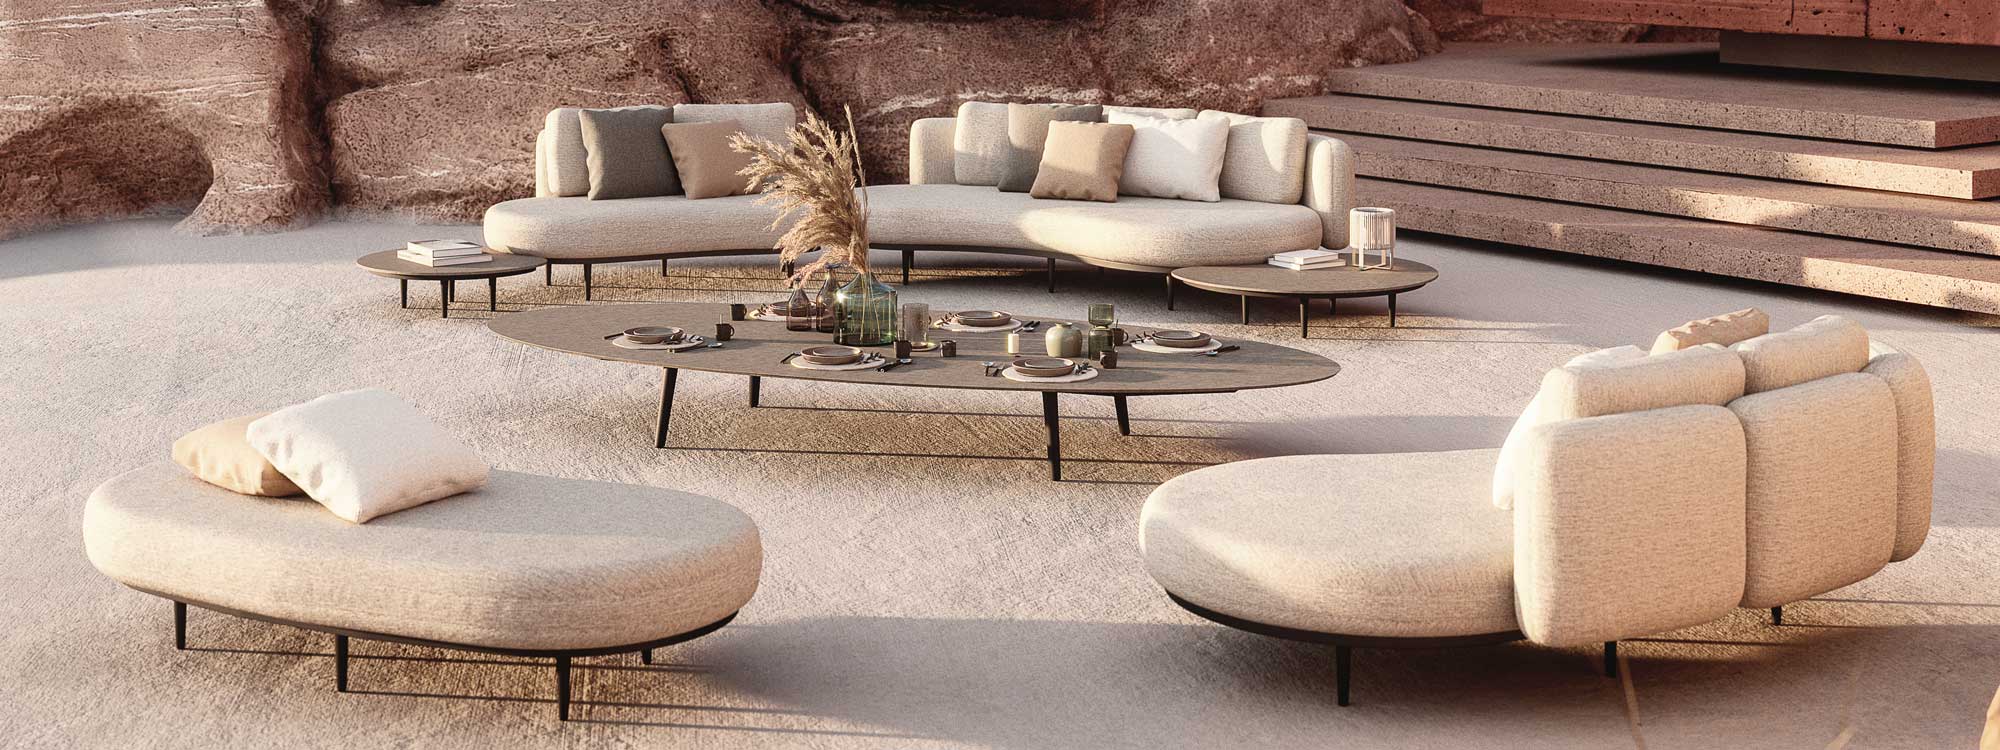 Image of Styletto low table surrounded by Organix modern garden sofas by Royal Botania